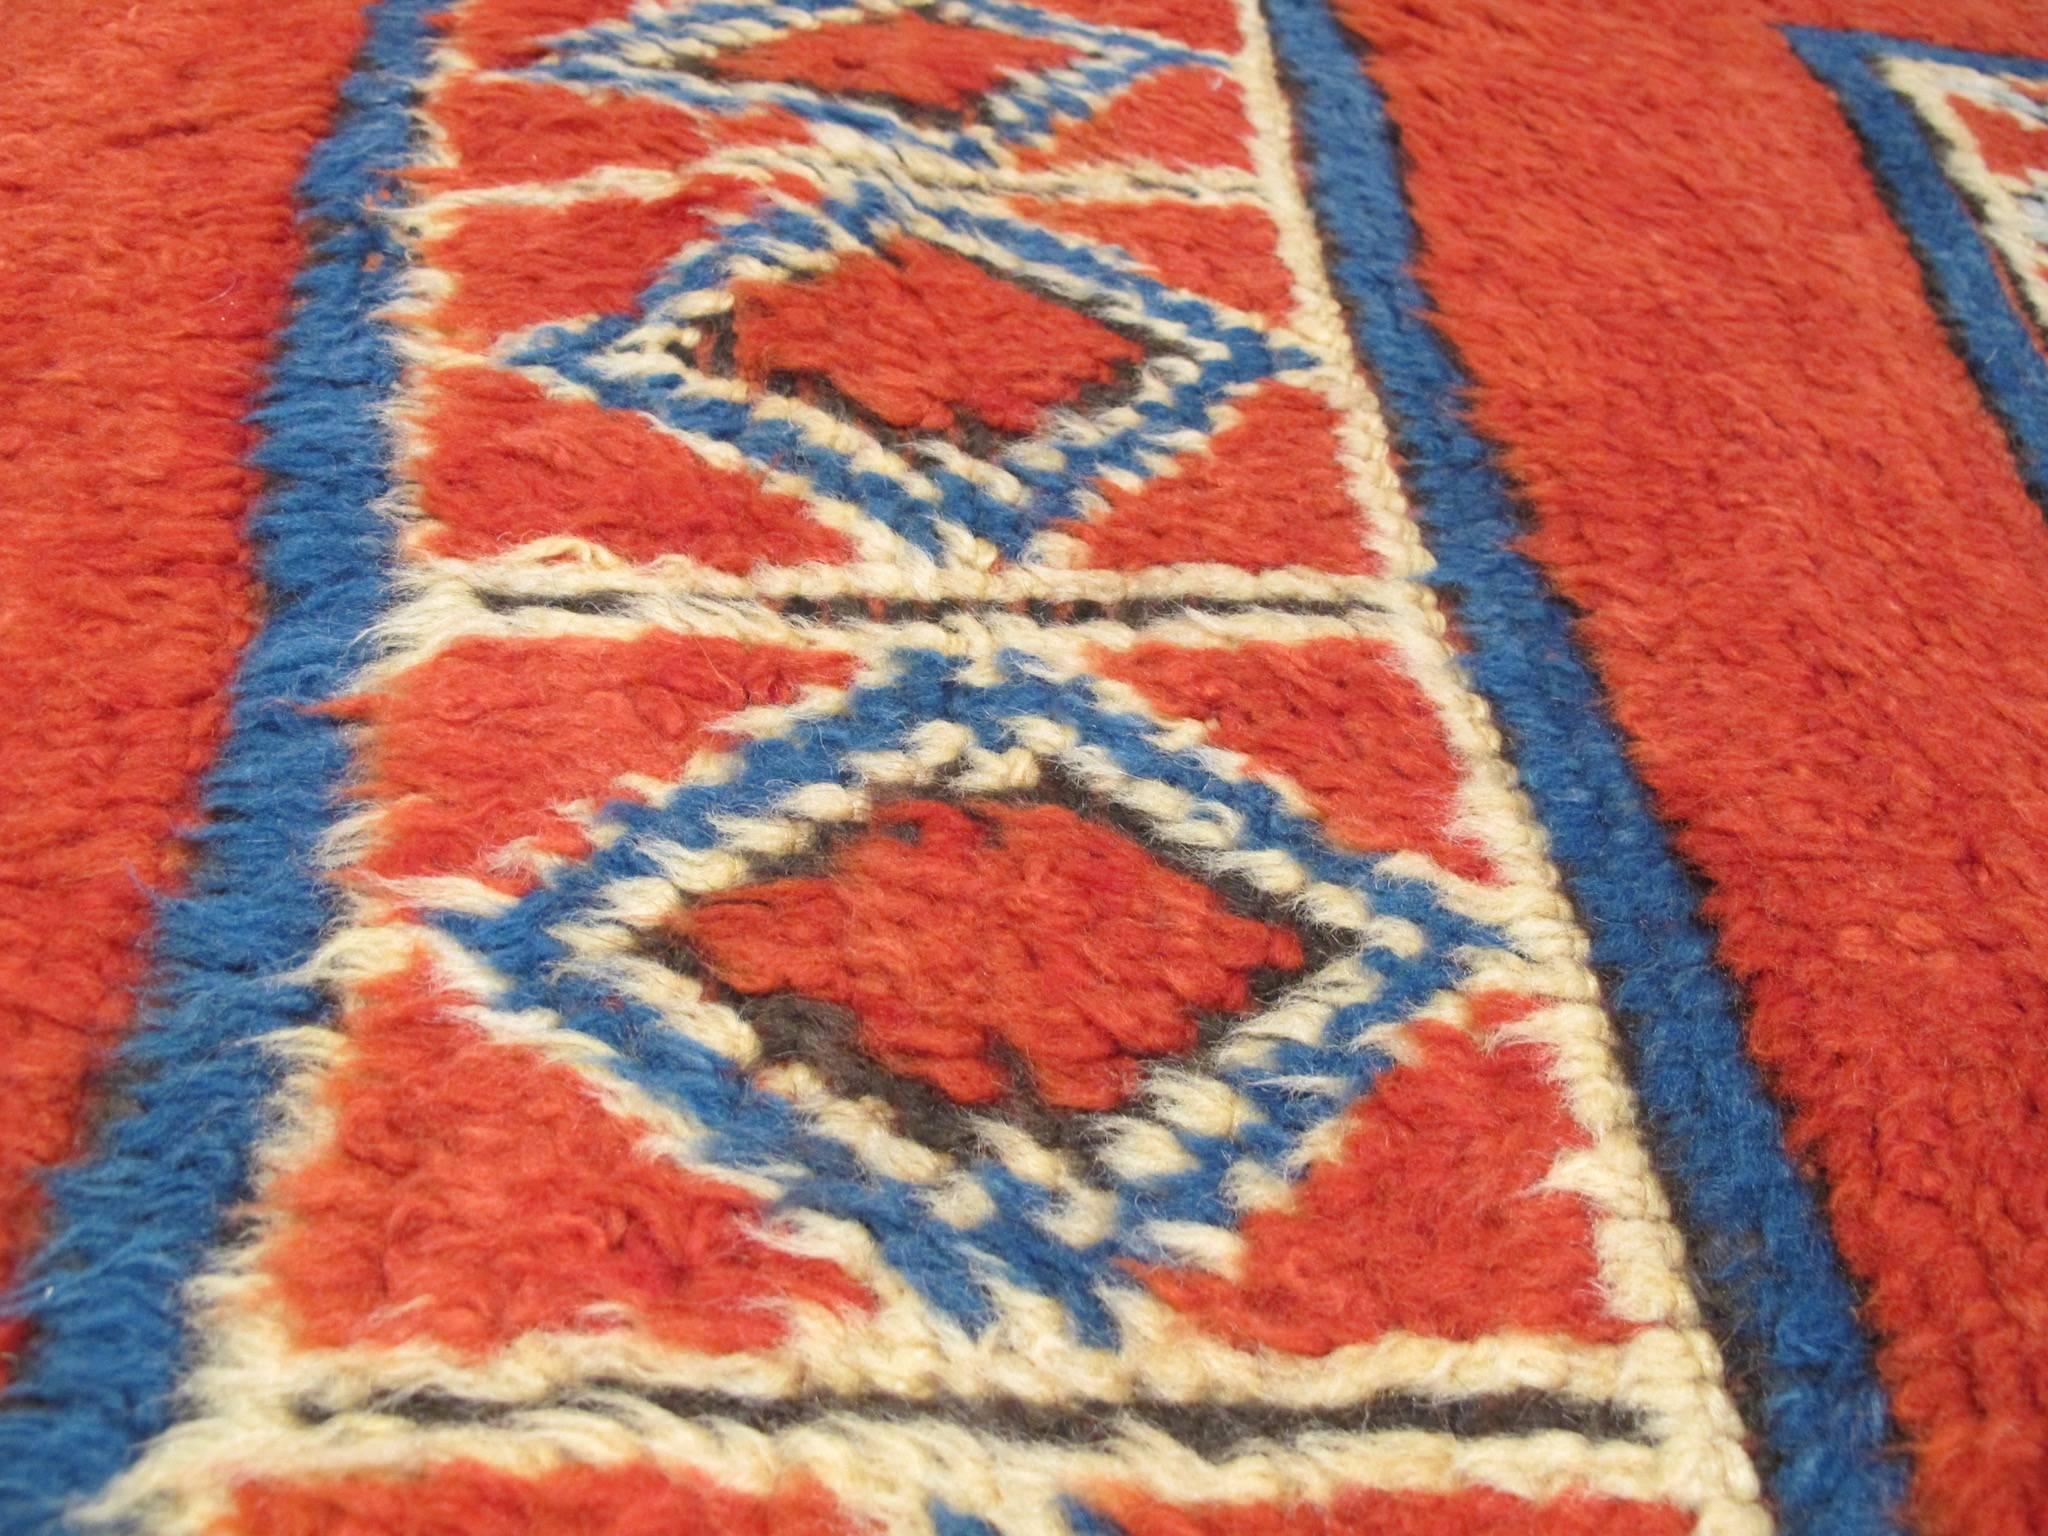 Hand-Woven Late 19th Century Moroccan Corridor Carpet with Madder Red Ground